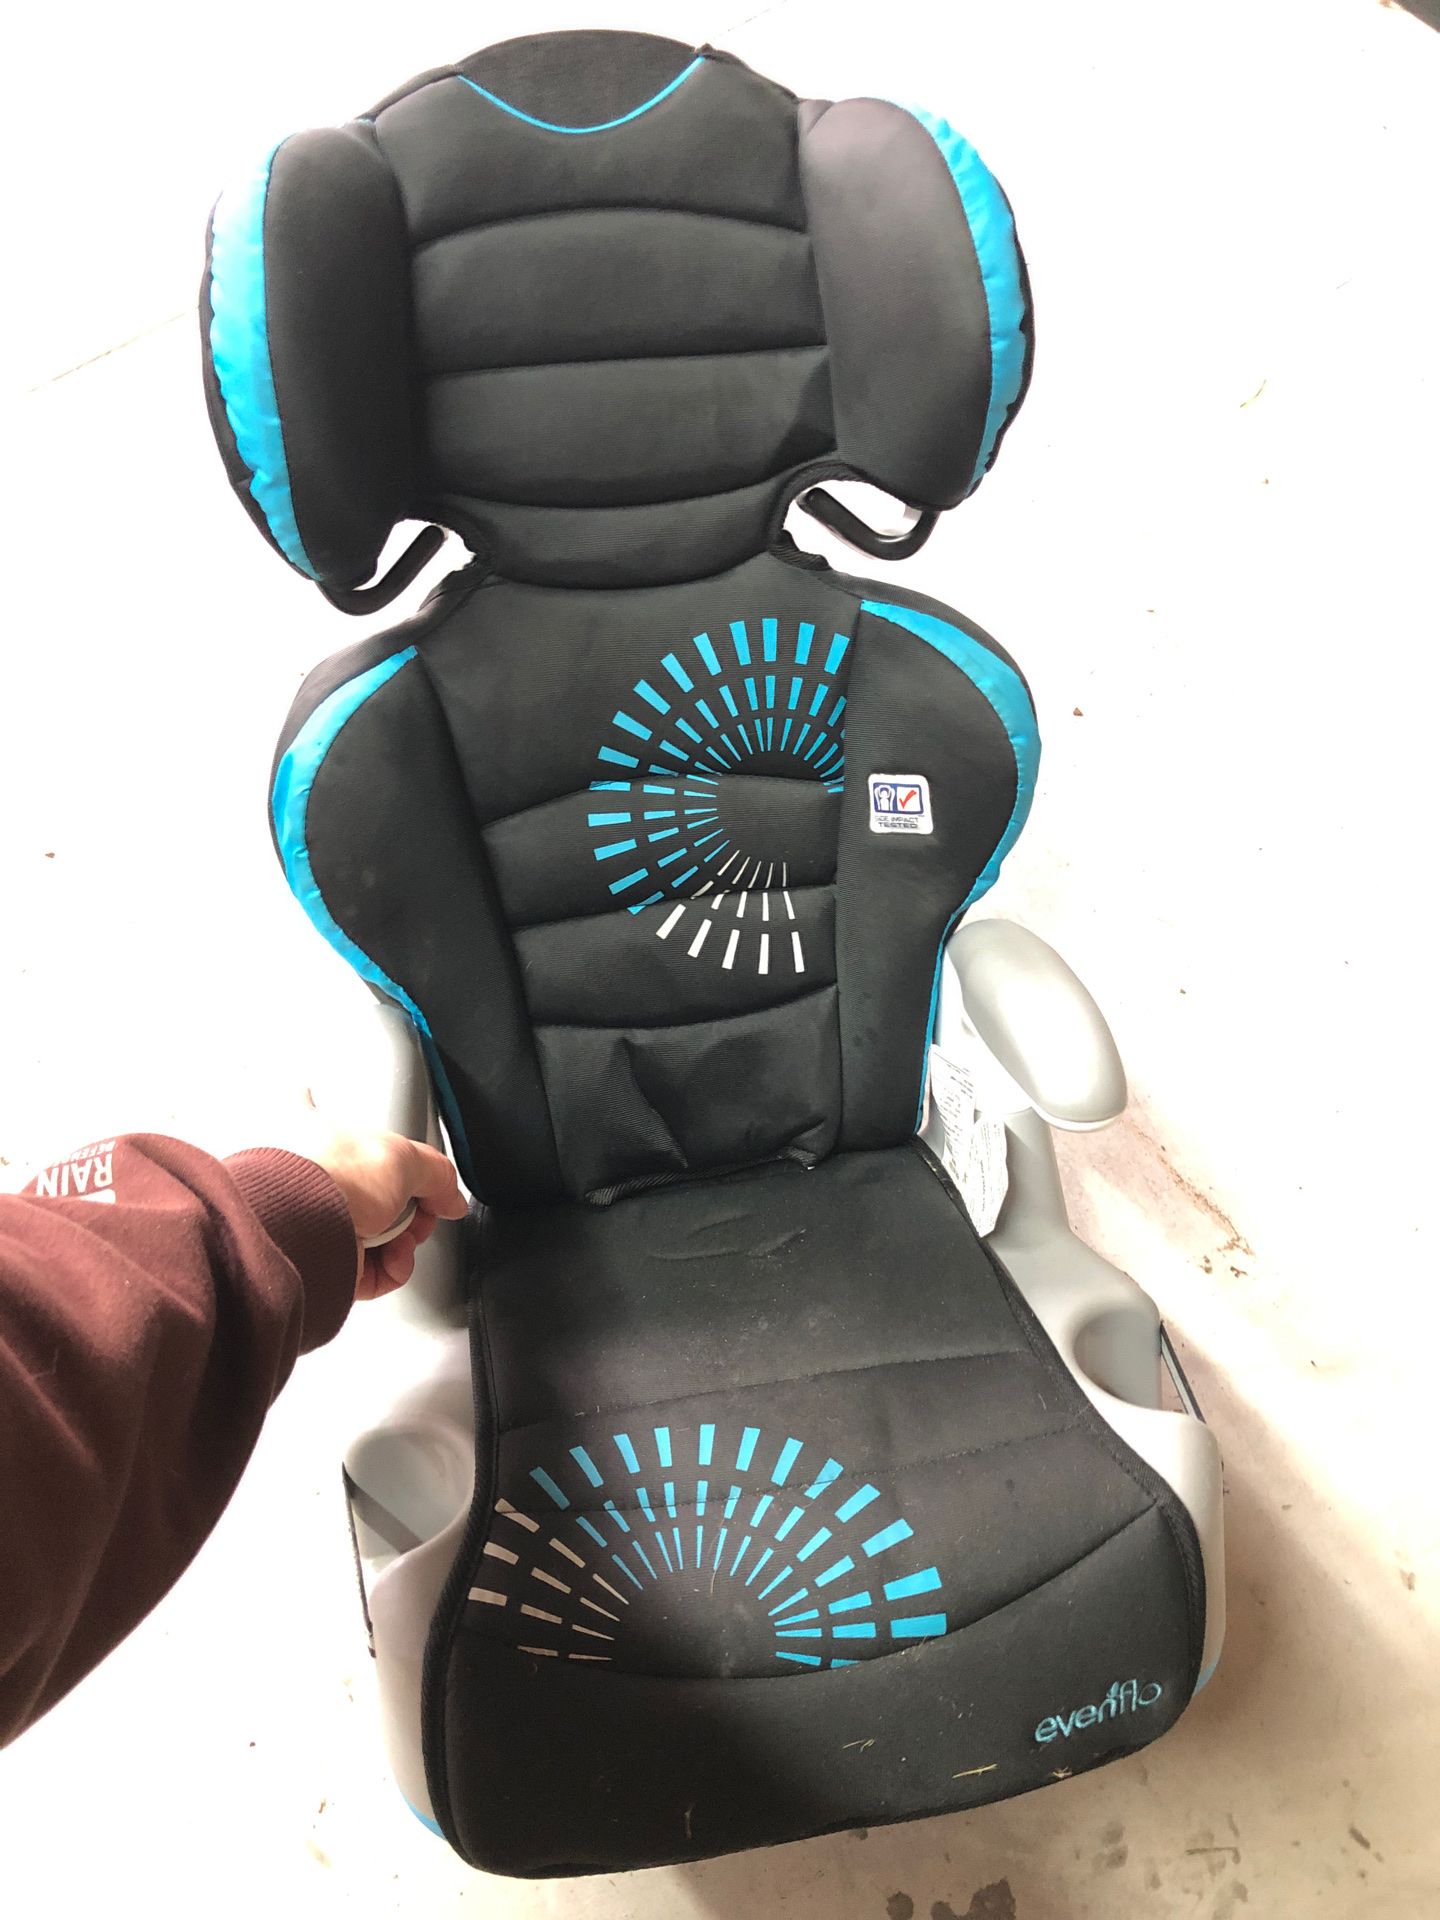 Child’s car seat/booster combo